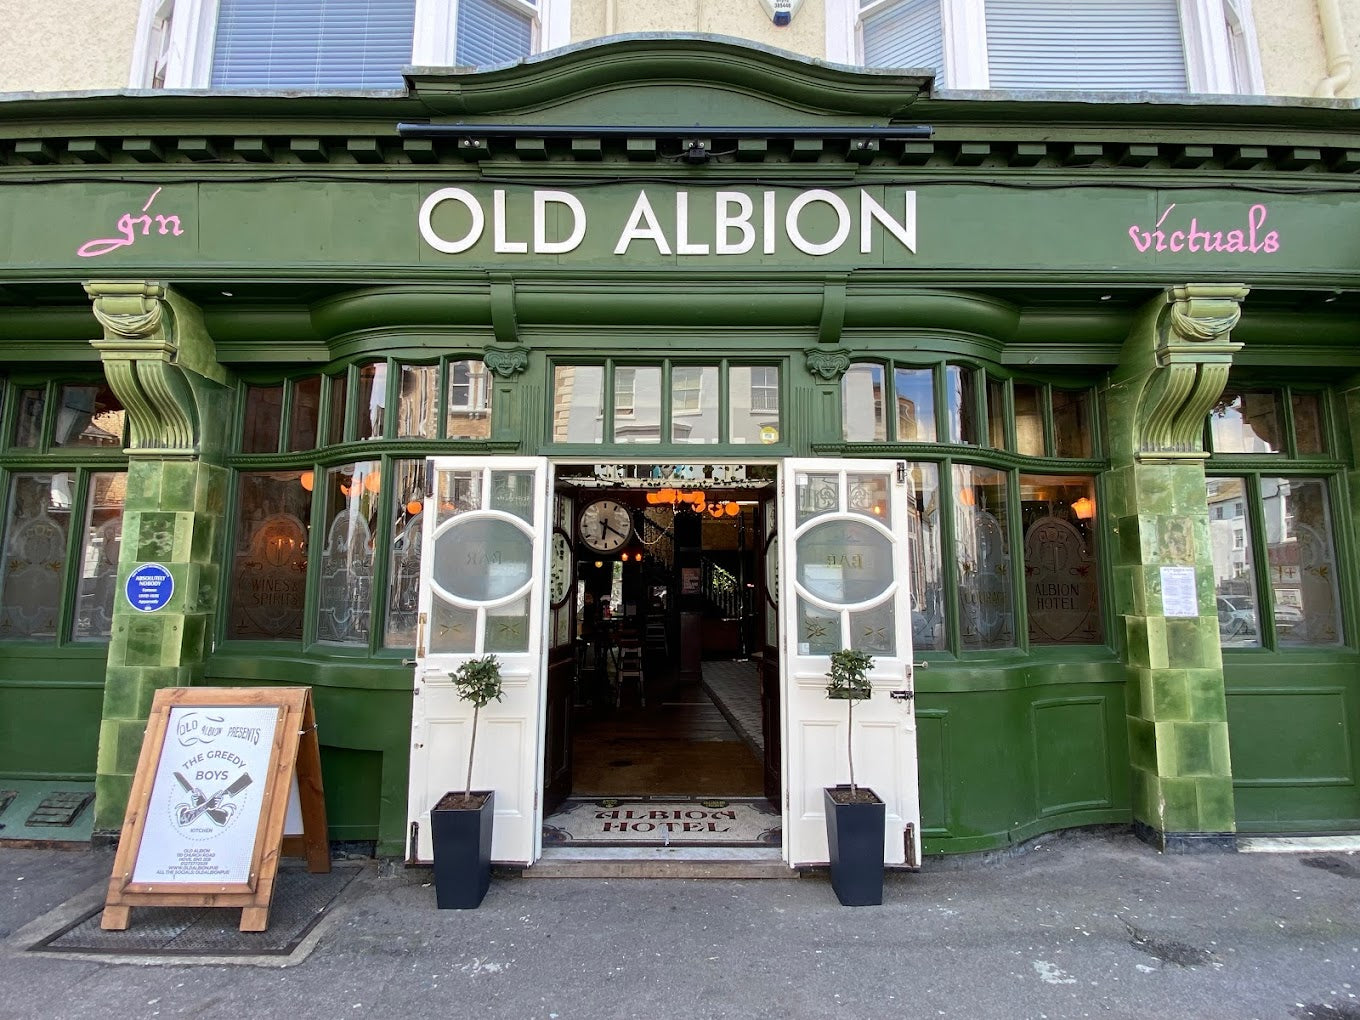 The Old Albion